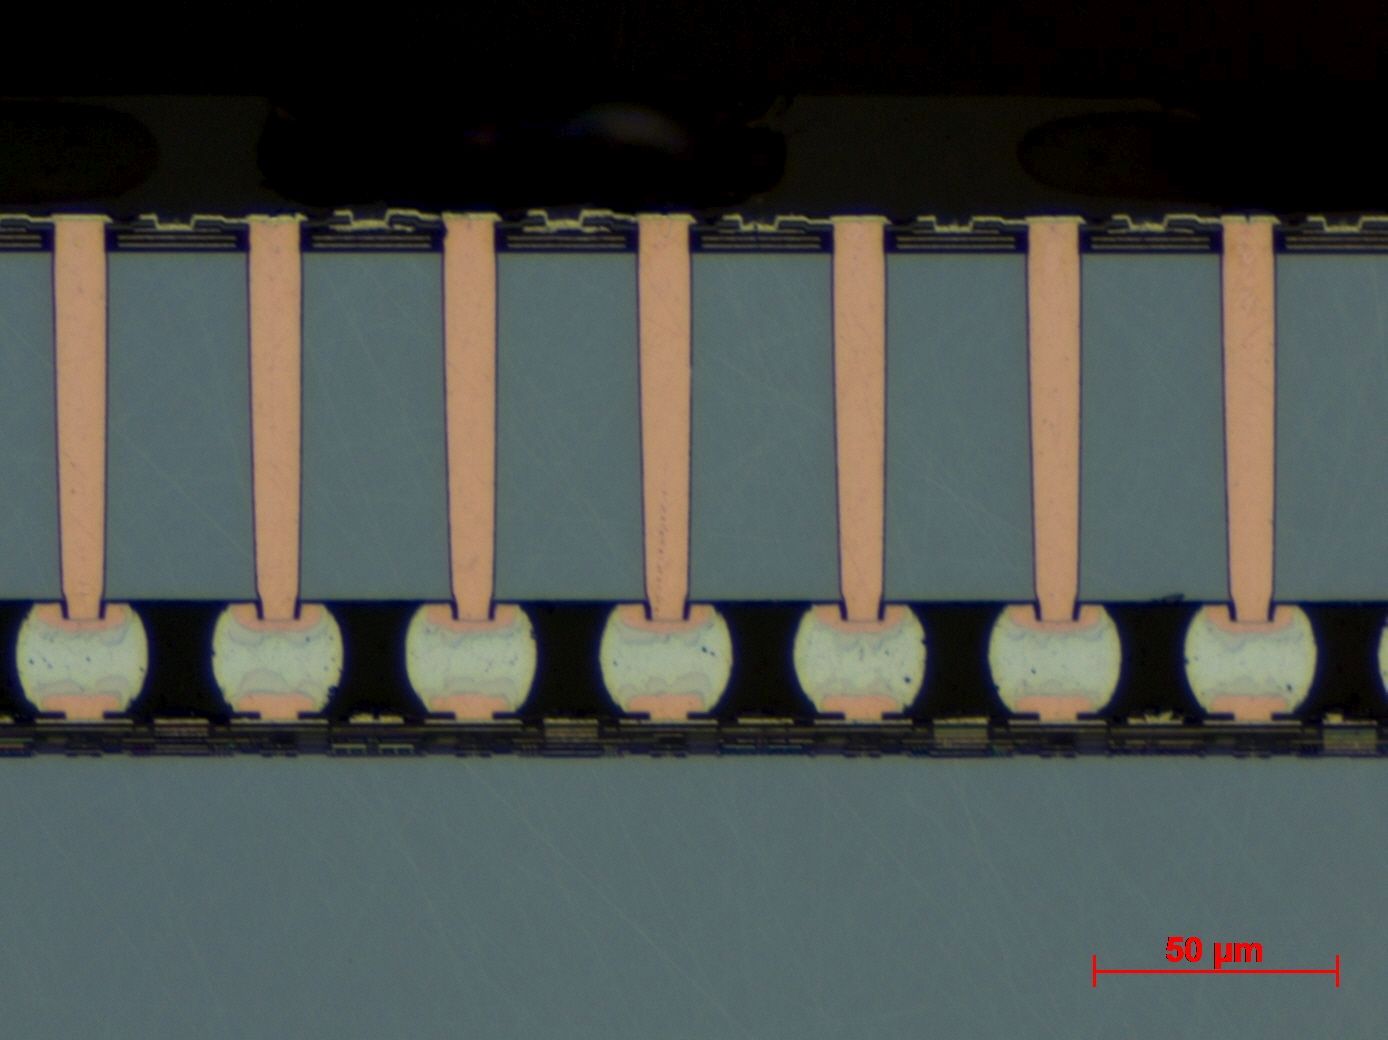 Thin sensor die with 256x256 SPAD array and TSVs mounted on ASIC